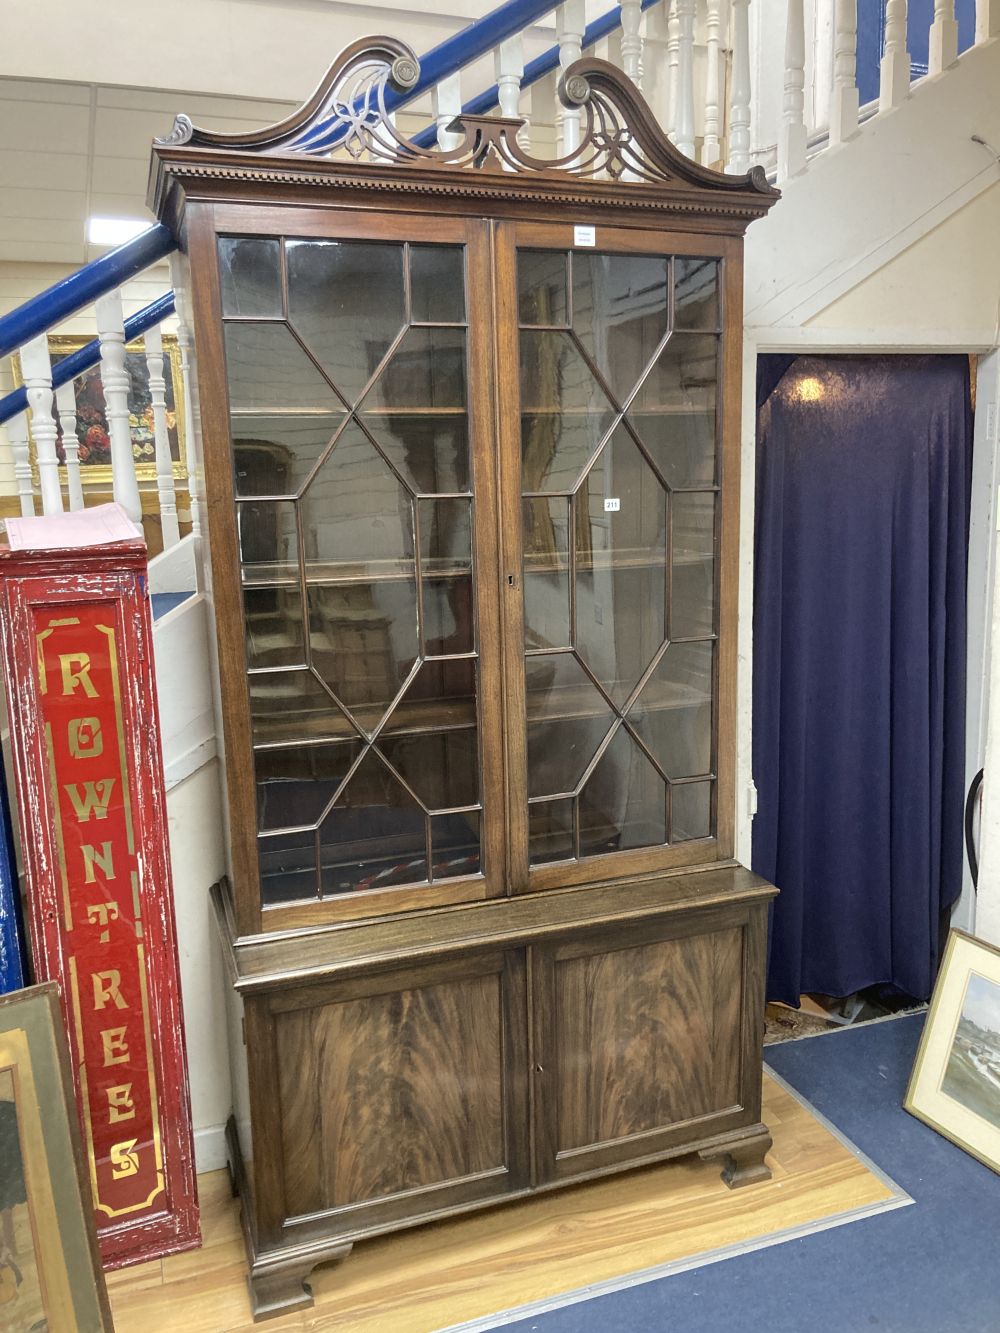 A George III style mahogany two door glass china display cabinet, with two panelled doors beneath, width 110cm depth 47cm height 220cm